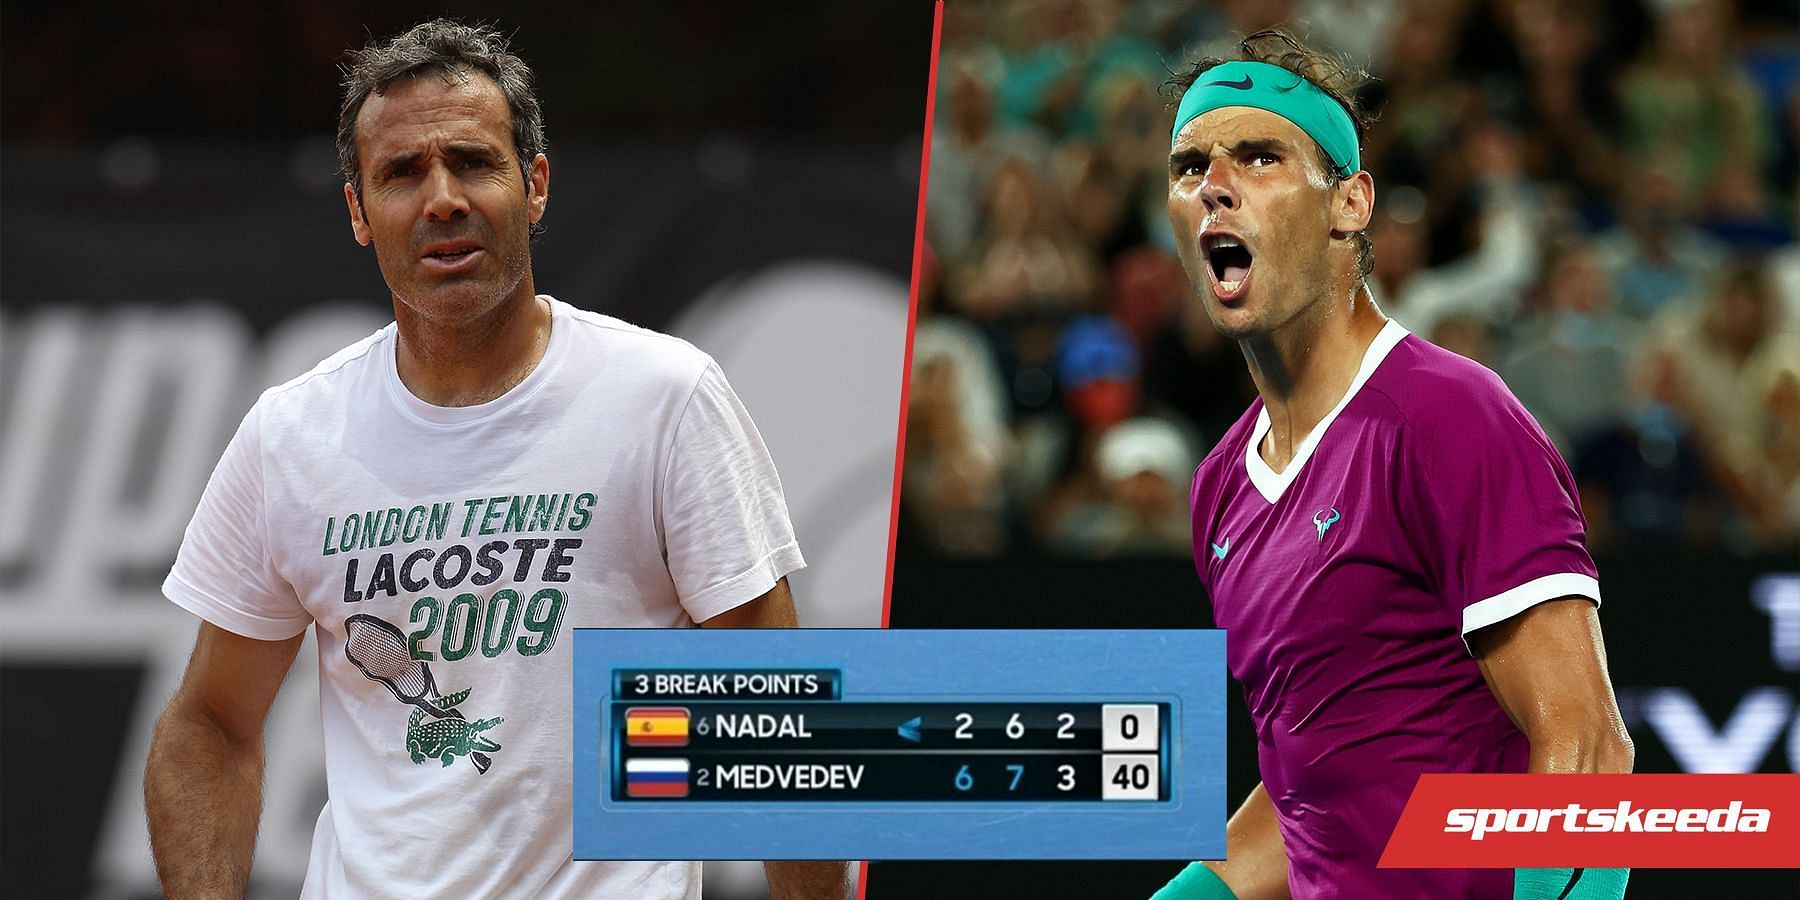 Rafael Nadal defeated Daniil Medvedev in the 2022 Australia Open final to lift his 21st Grand Slam title.